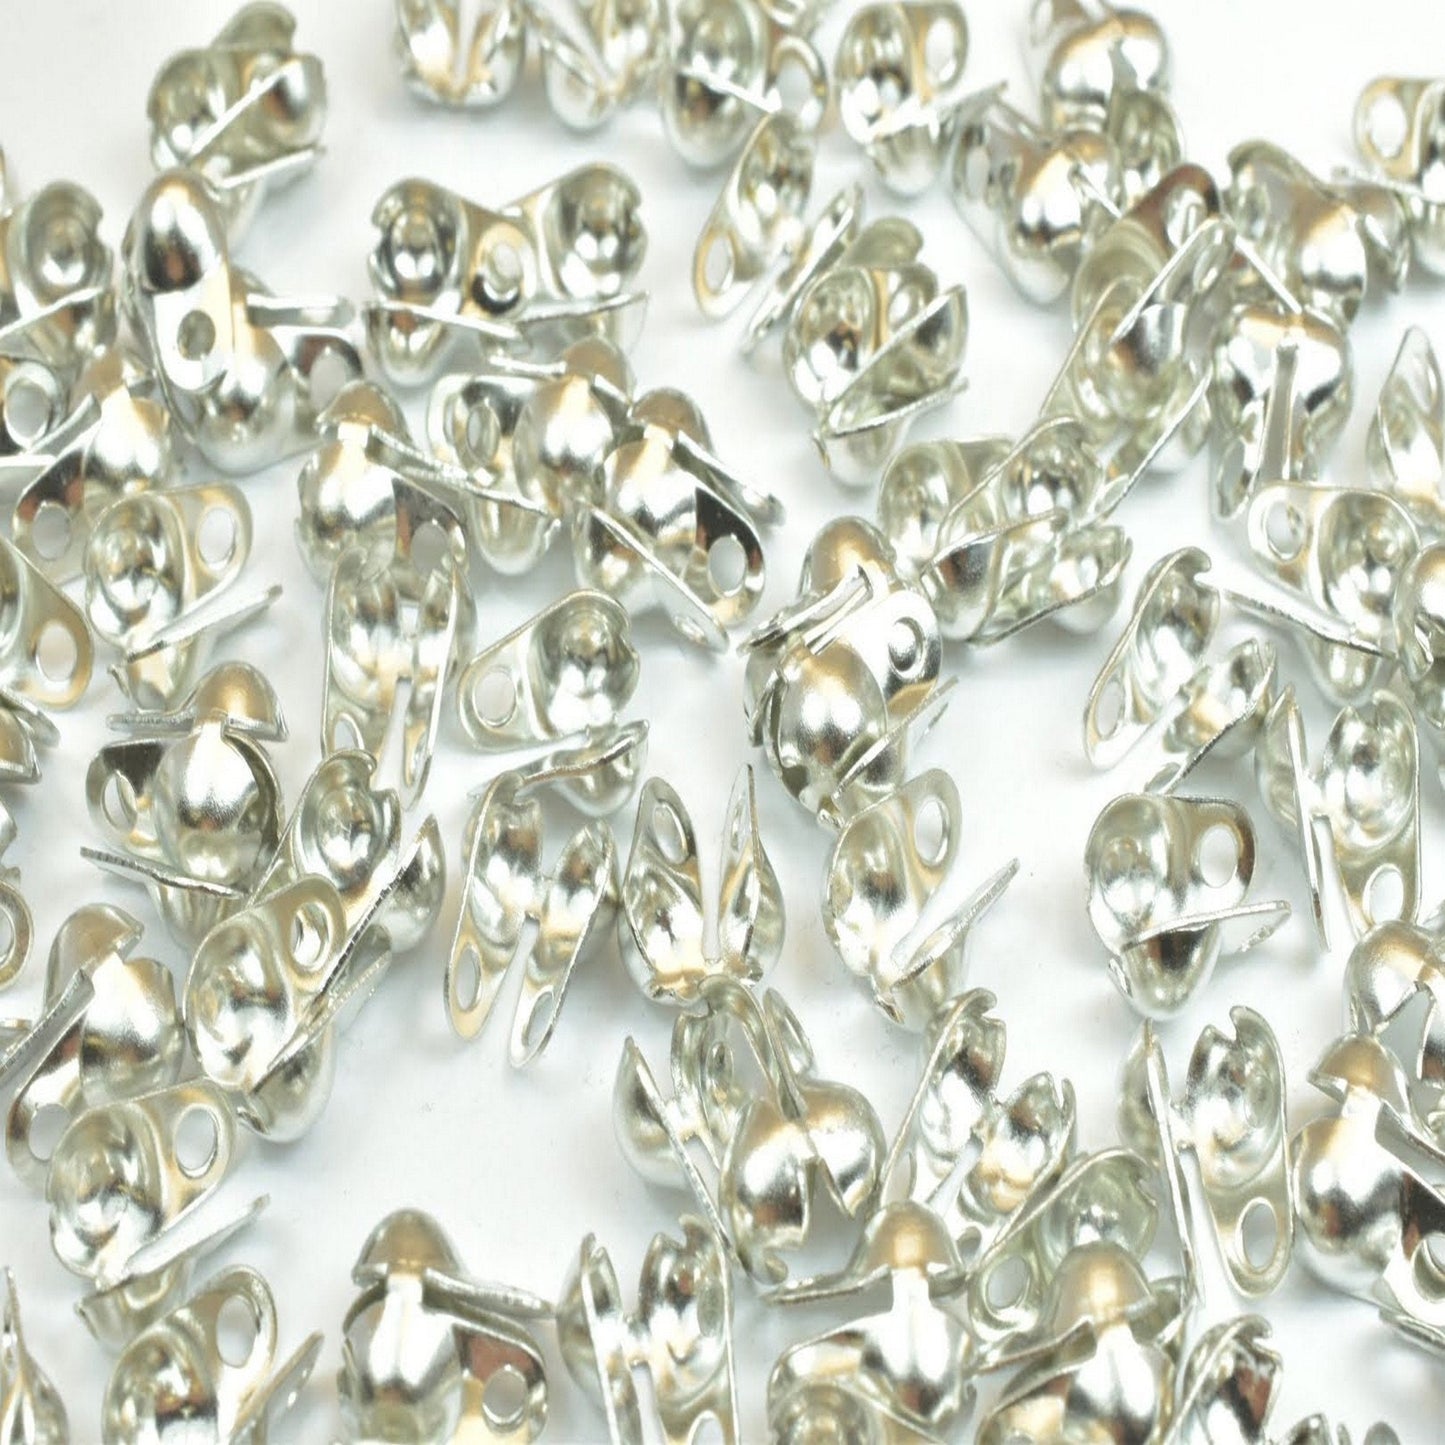 Ball chain crimp cover end tip beads size 1.5mm, 2.4mm, 3.2mm, 4mm for jewelry making findings silver and gold tone